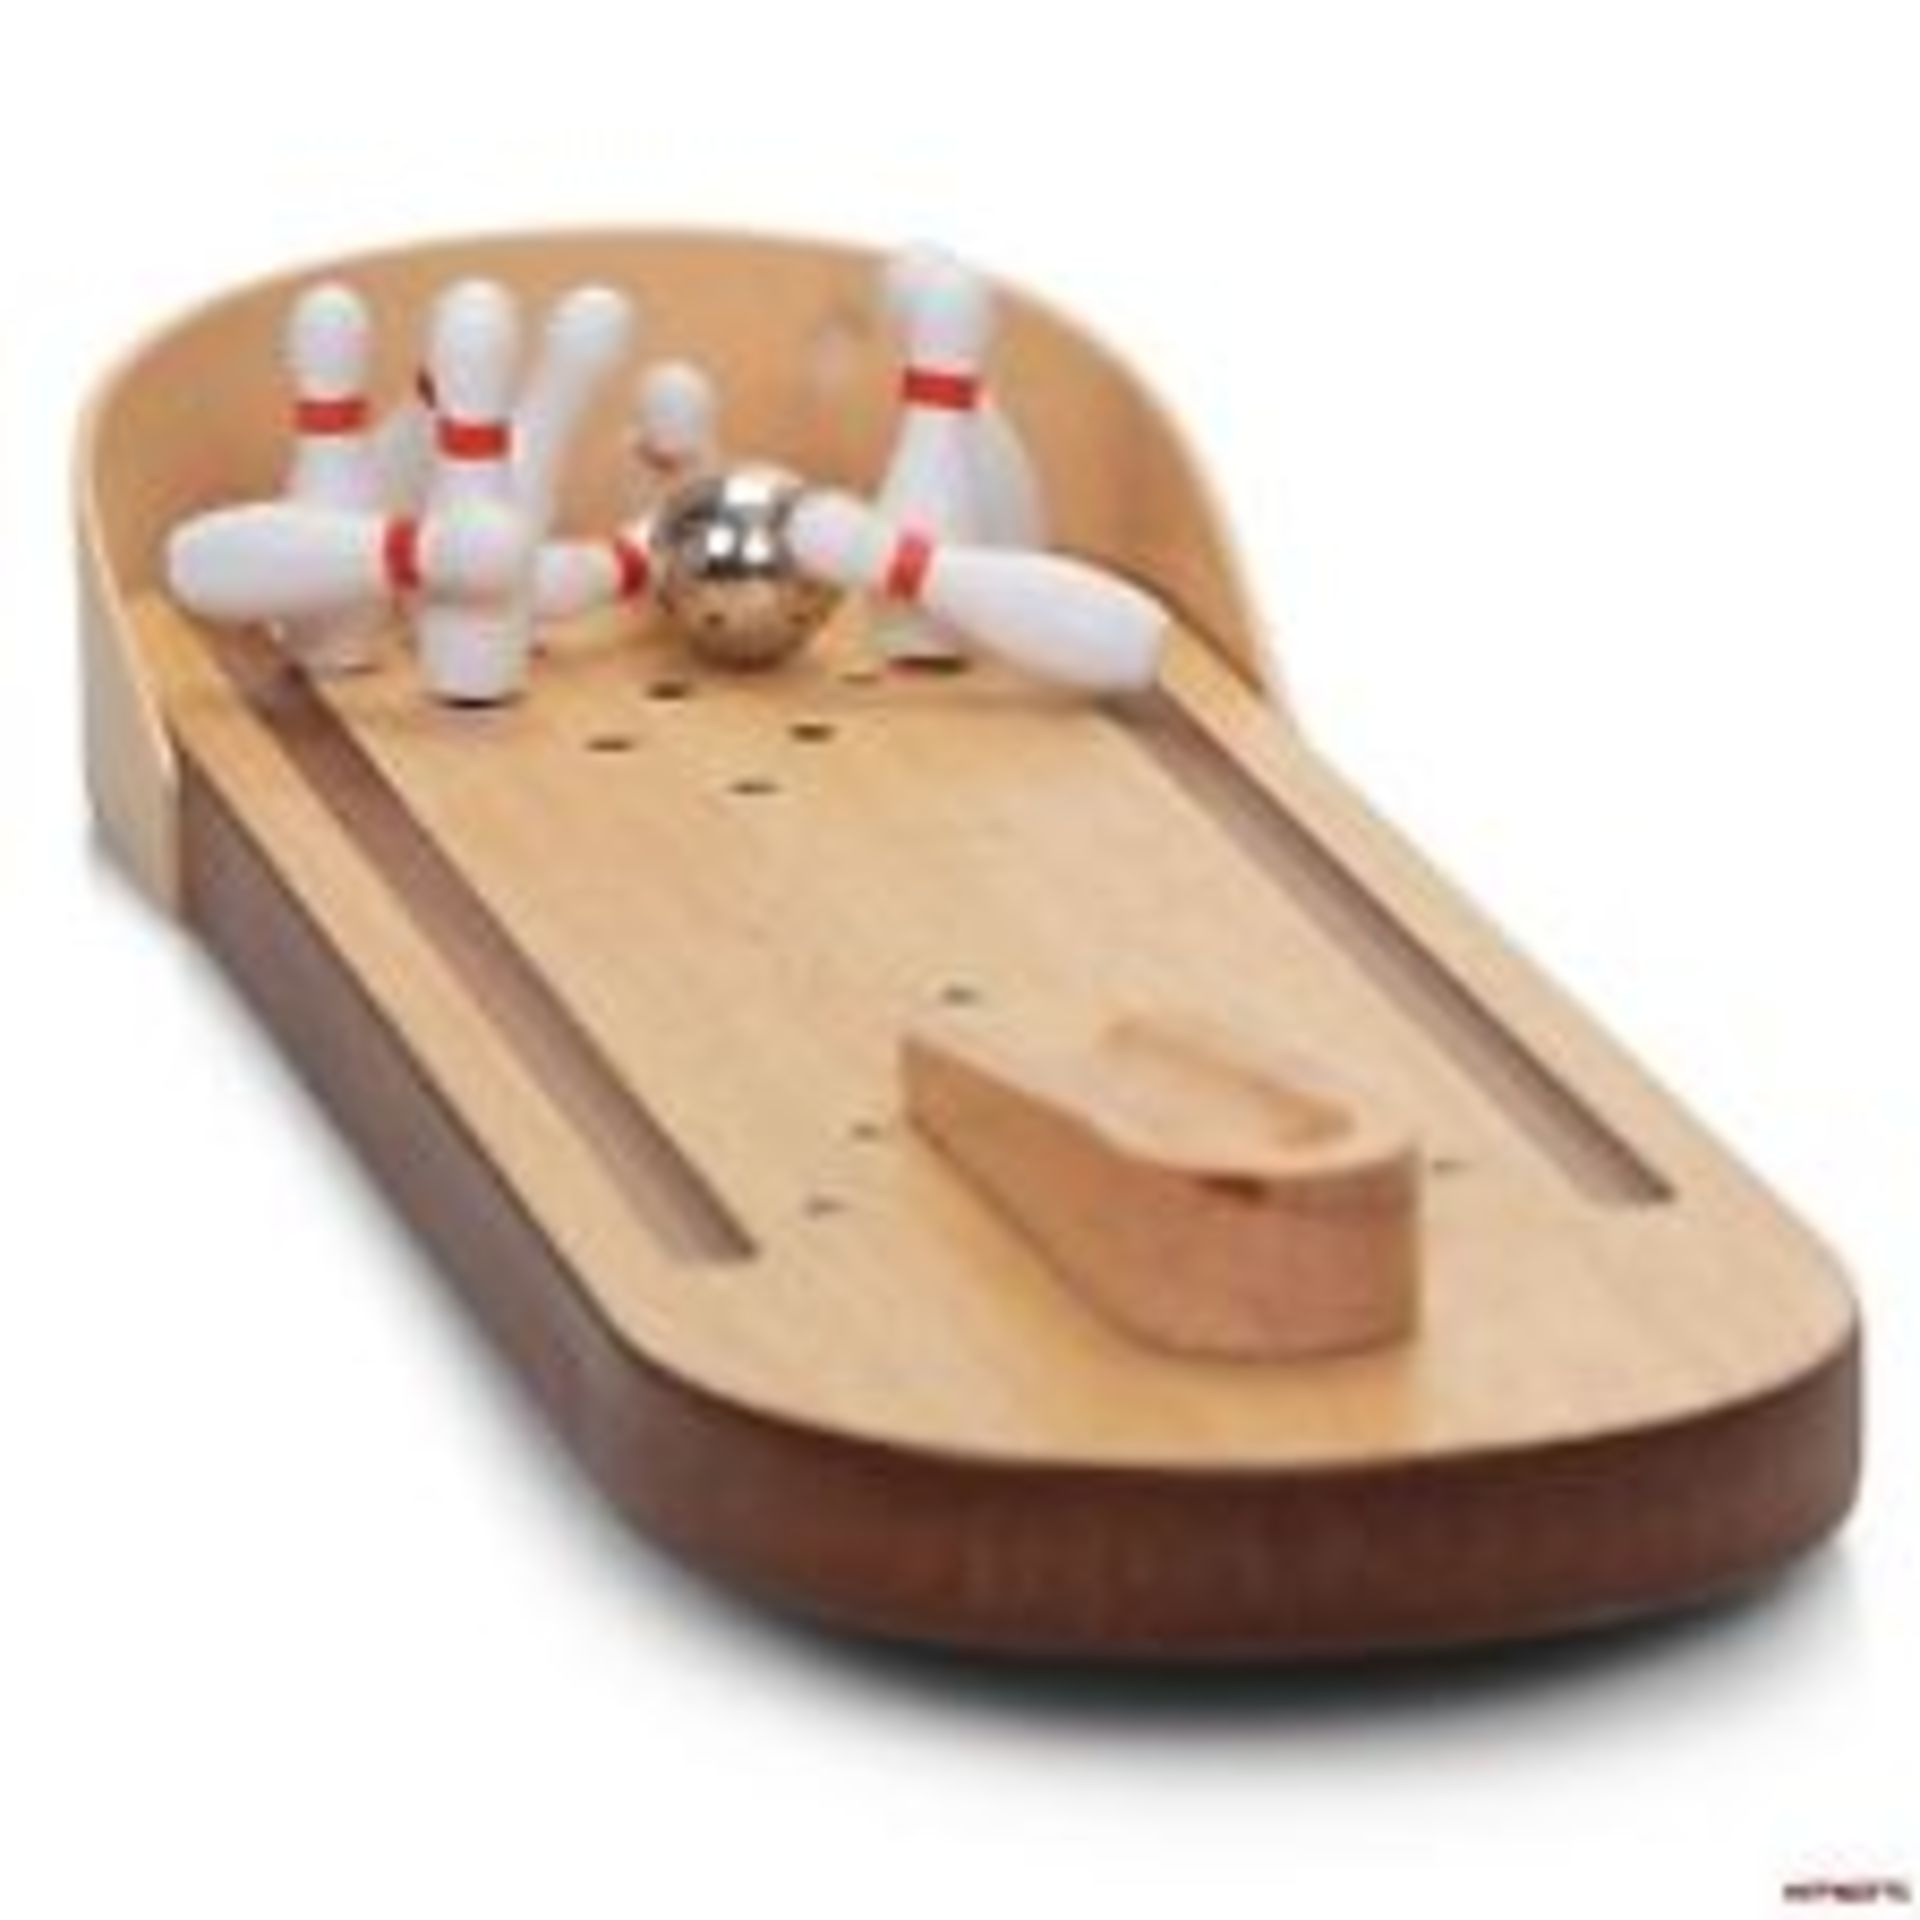 V Brand New Ten Pin Bowling Alley Game X  2  Bid price to be multiplied by Two